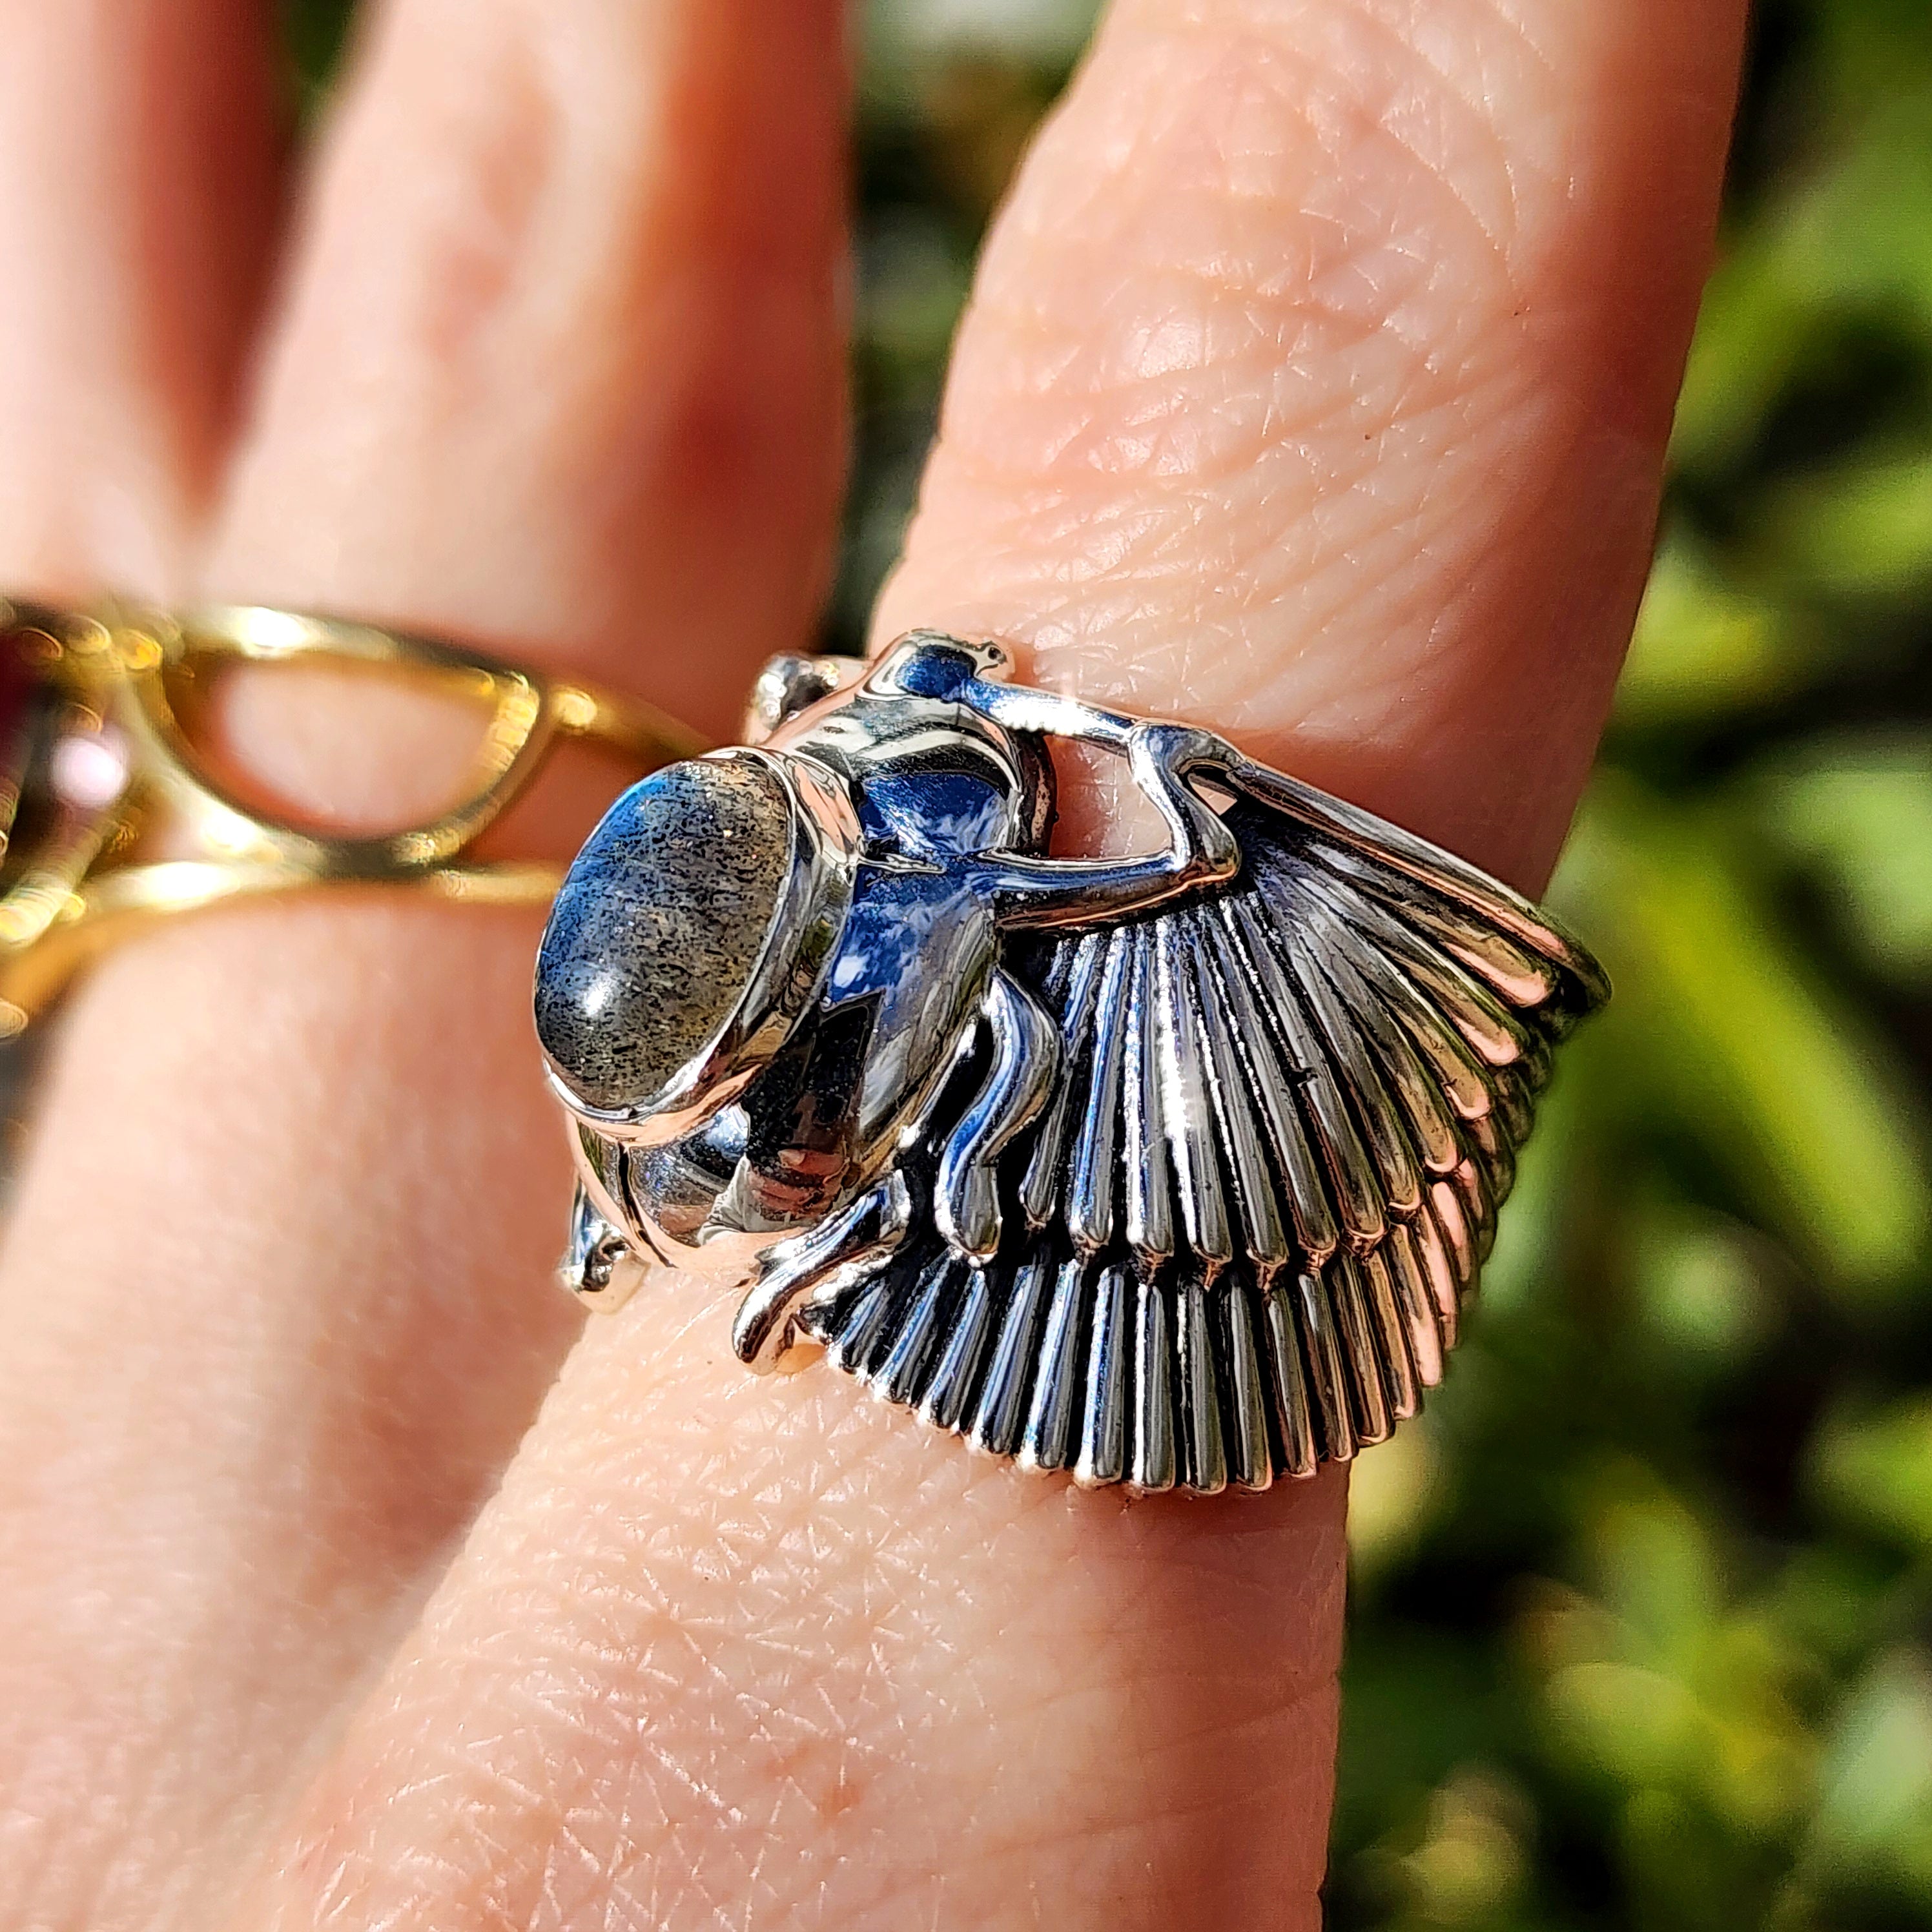 Labradorite Scarab Finger Cuff Adjustable Ring .925 Silver for Insight, Magic, Protection and Transformation